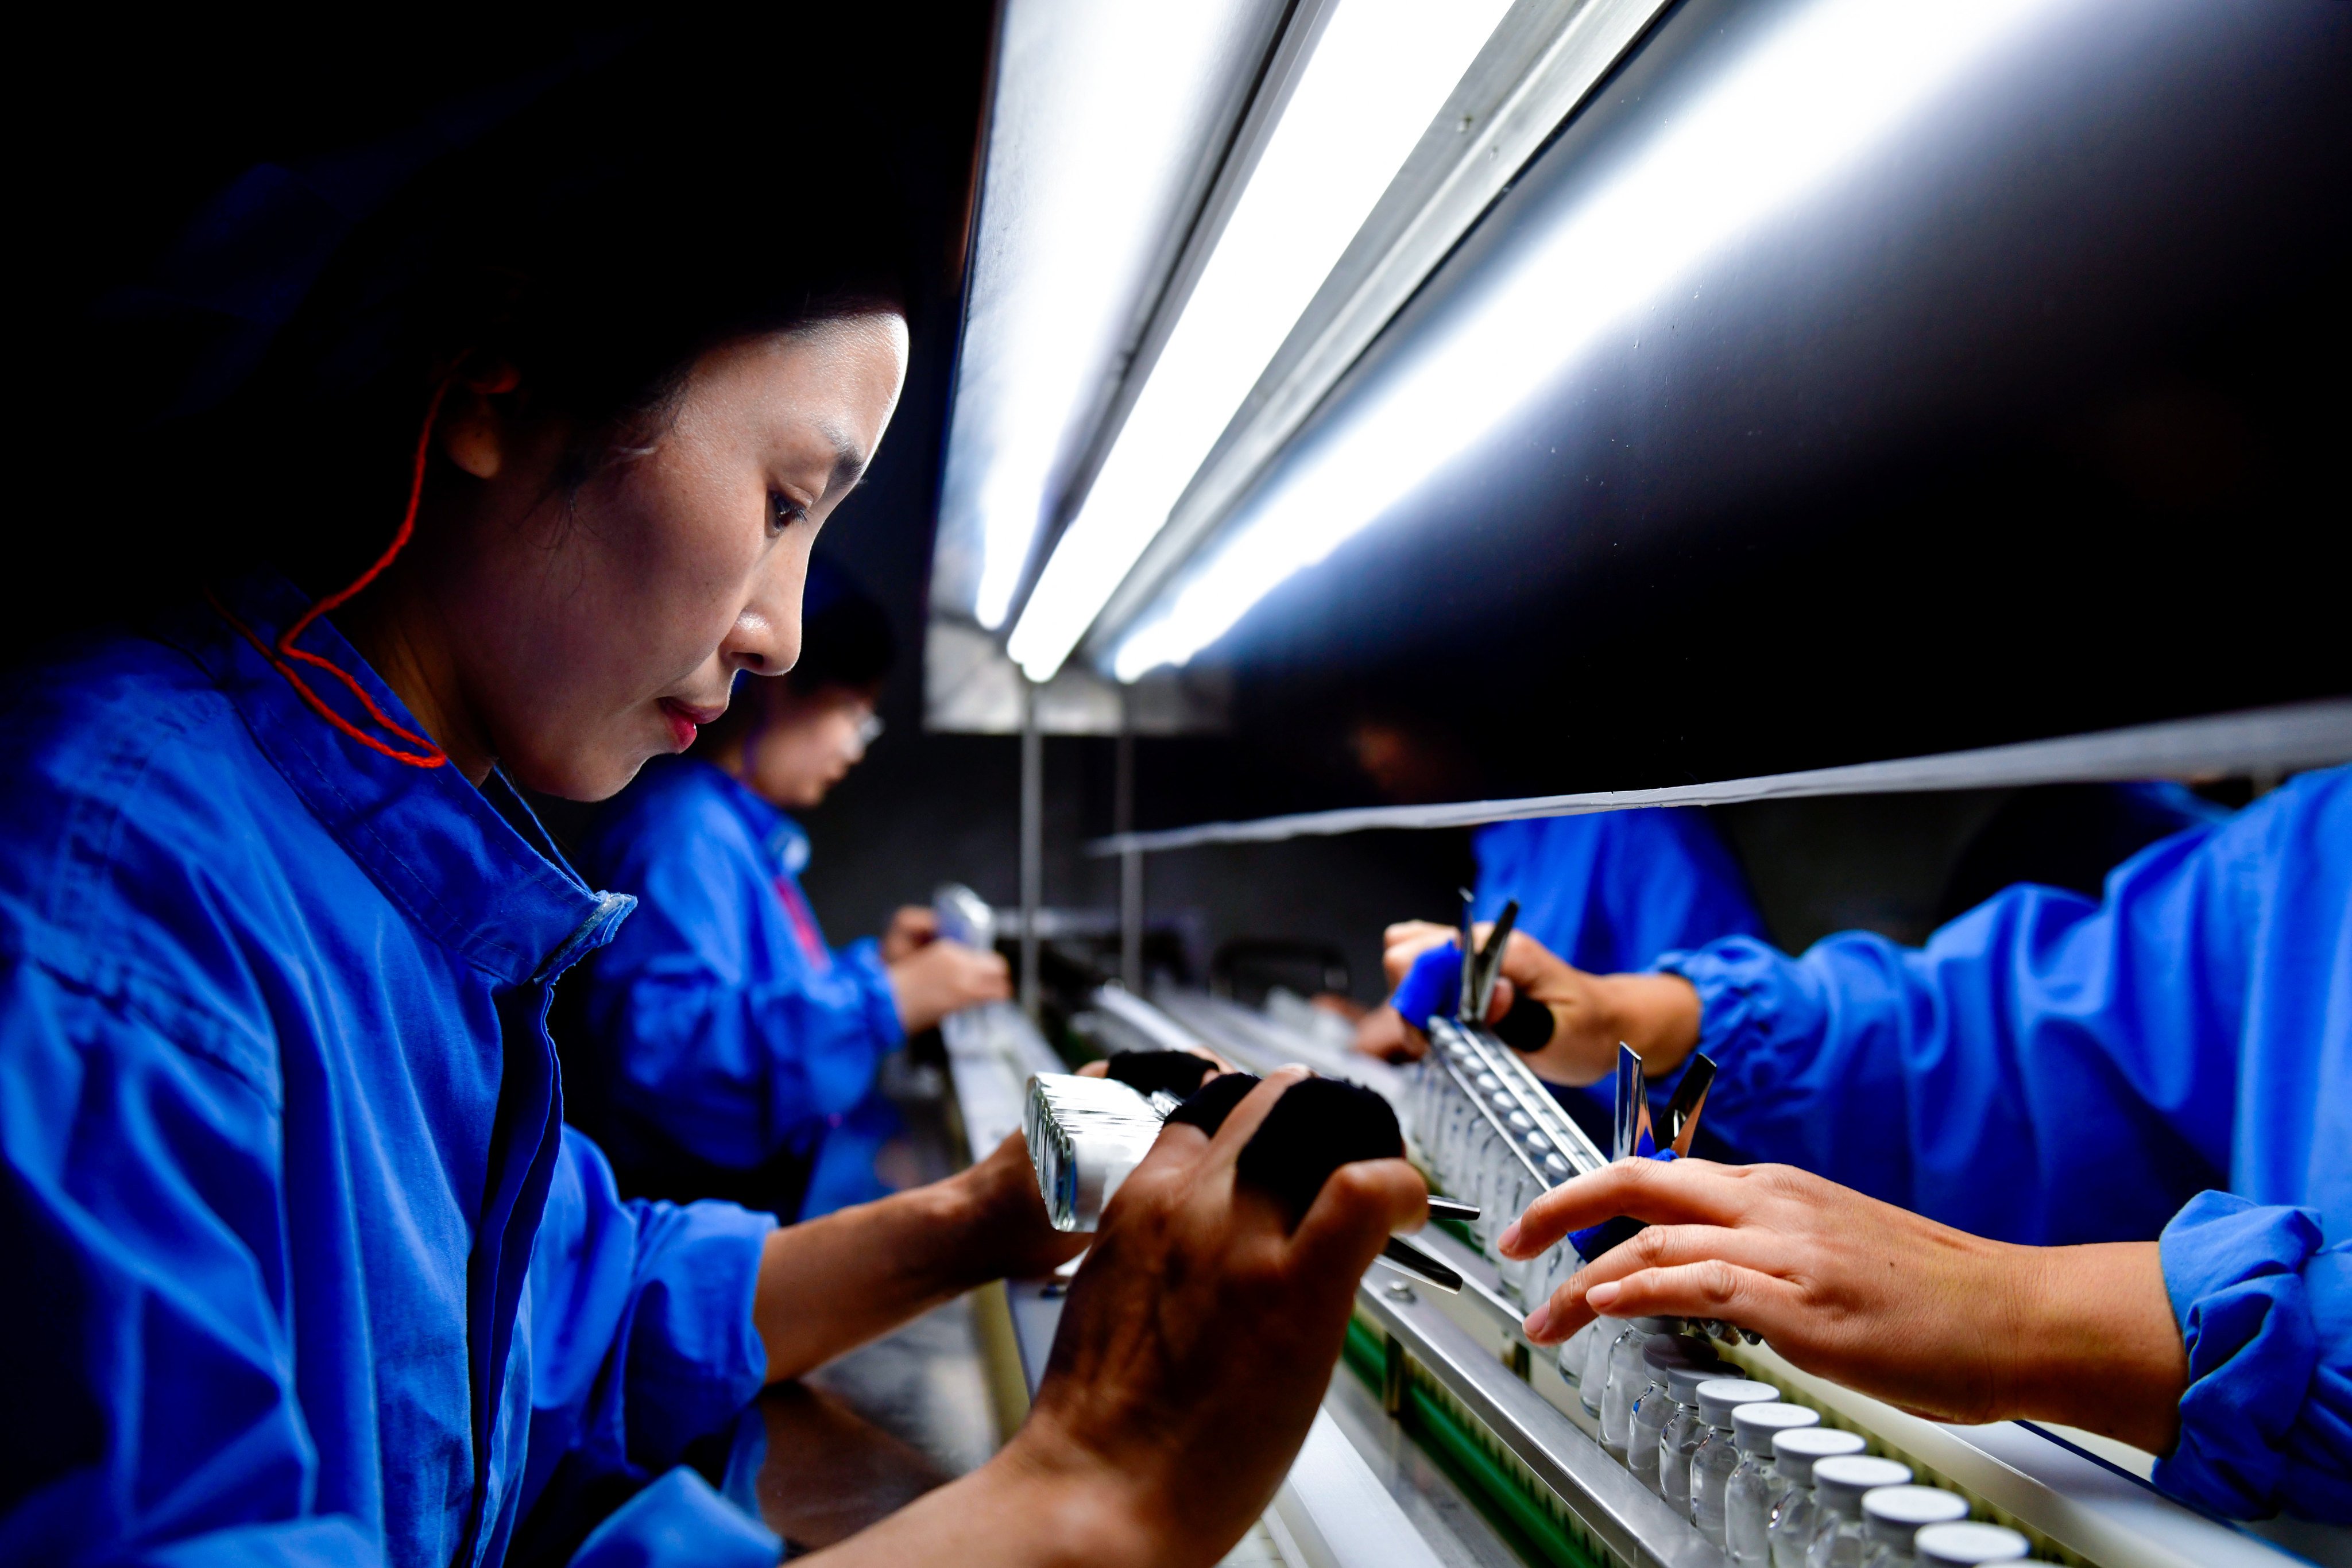 China now has 10,000 sizeable pharmaceutical enterprises researching the second-highest number of new medicines in the world, according to government data. Photo: Xinhua